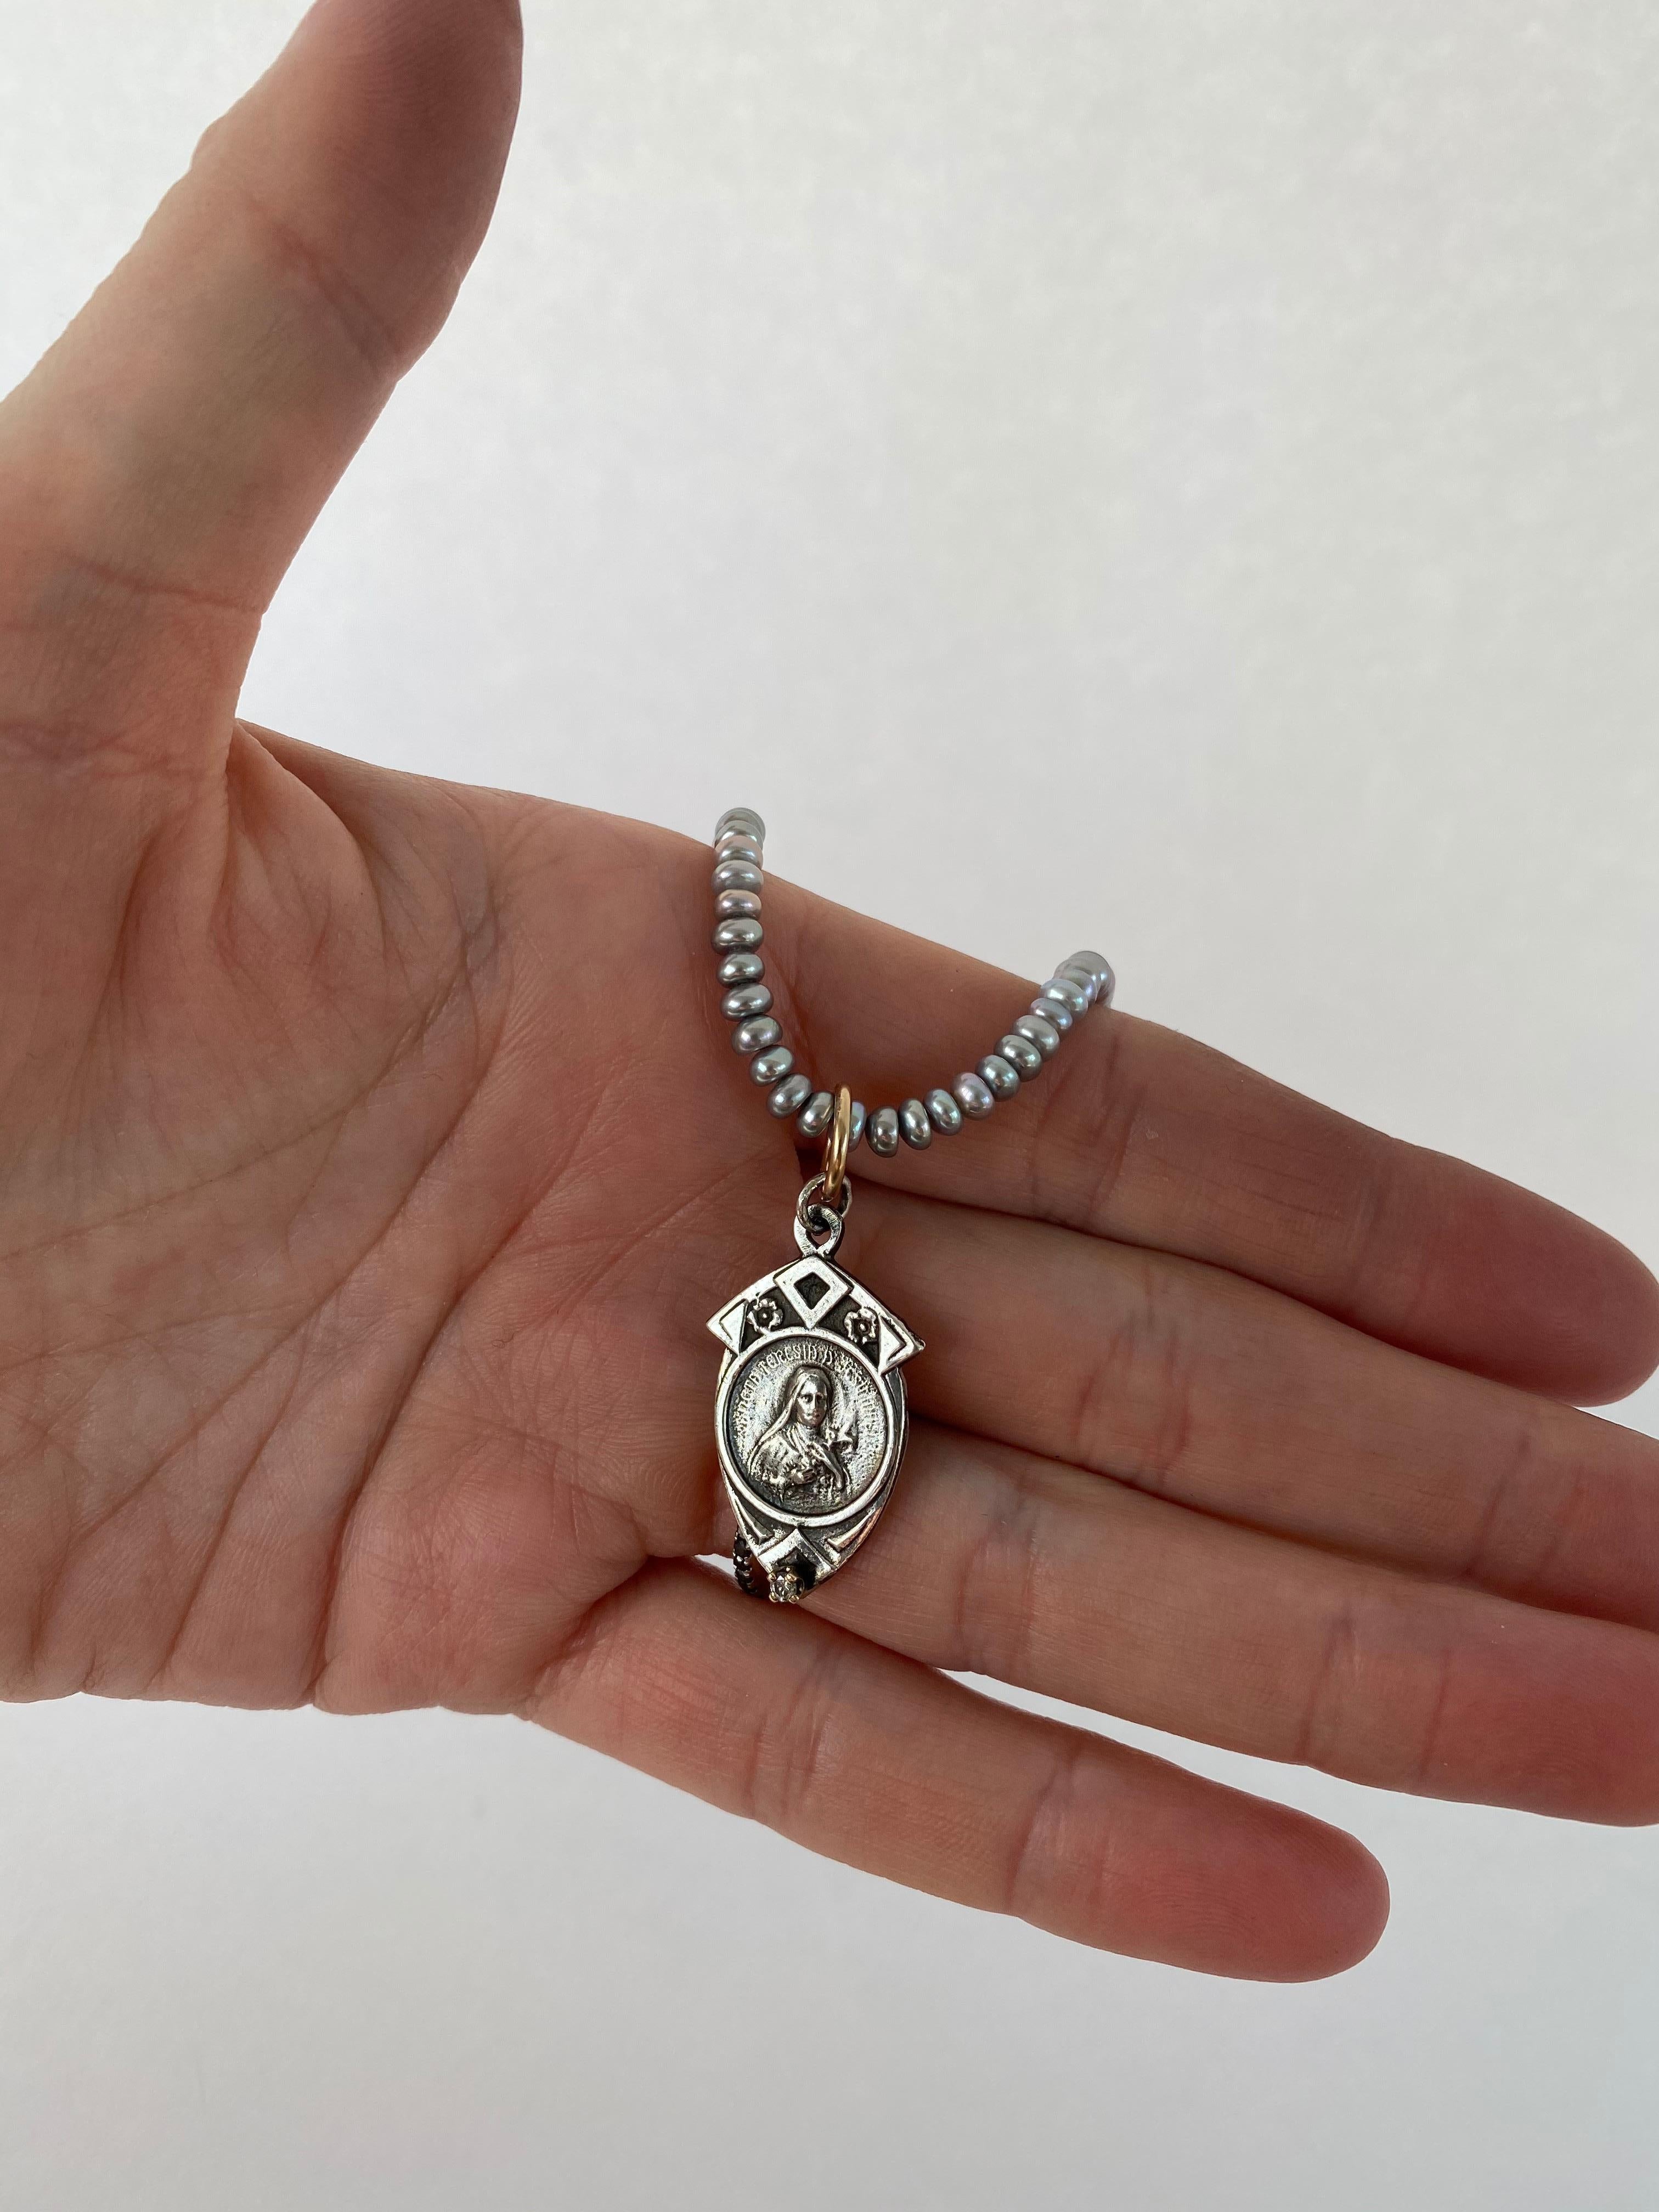 Medal Virgin Mary Necklace Bead Silver Pendant Pearl Turquoise J Dauphin In New Condition For Sale In Los Angeles, CA